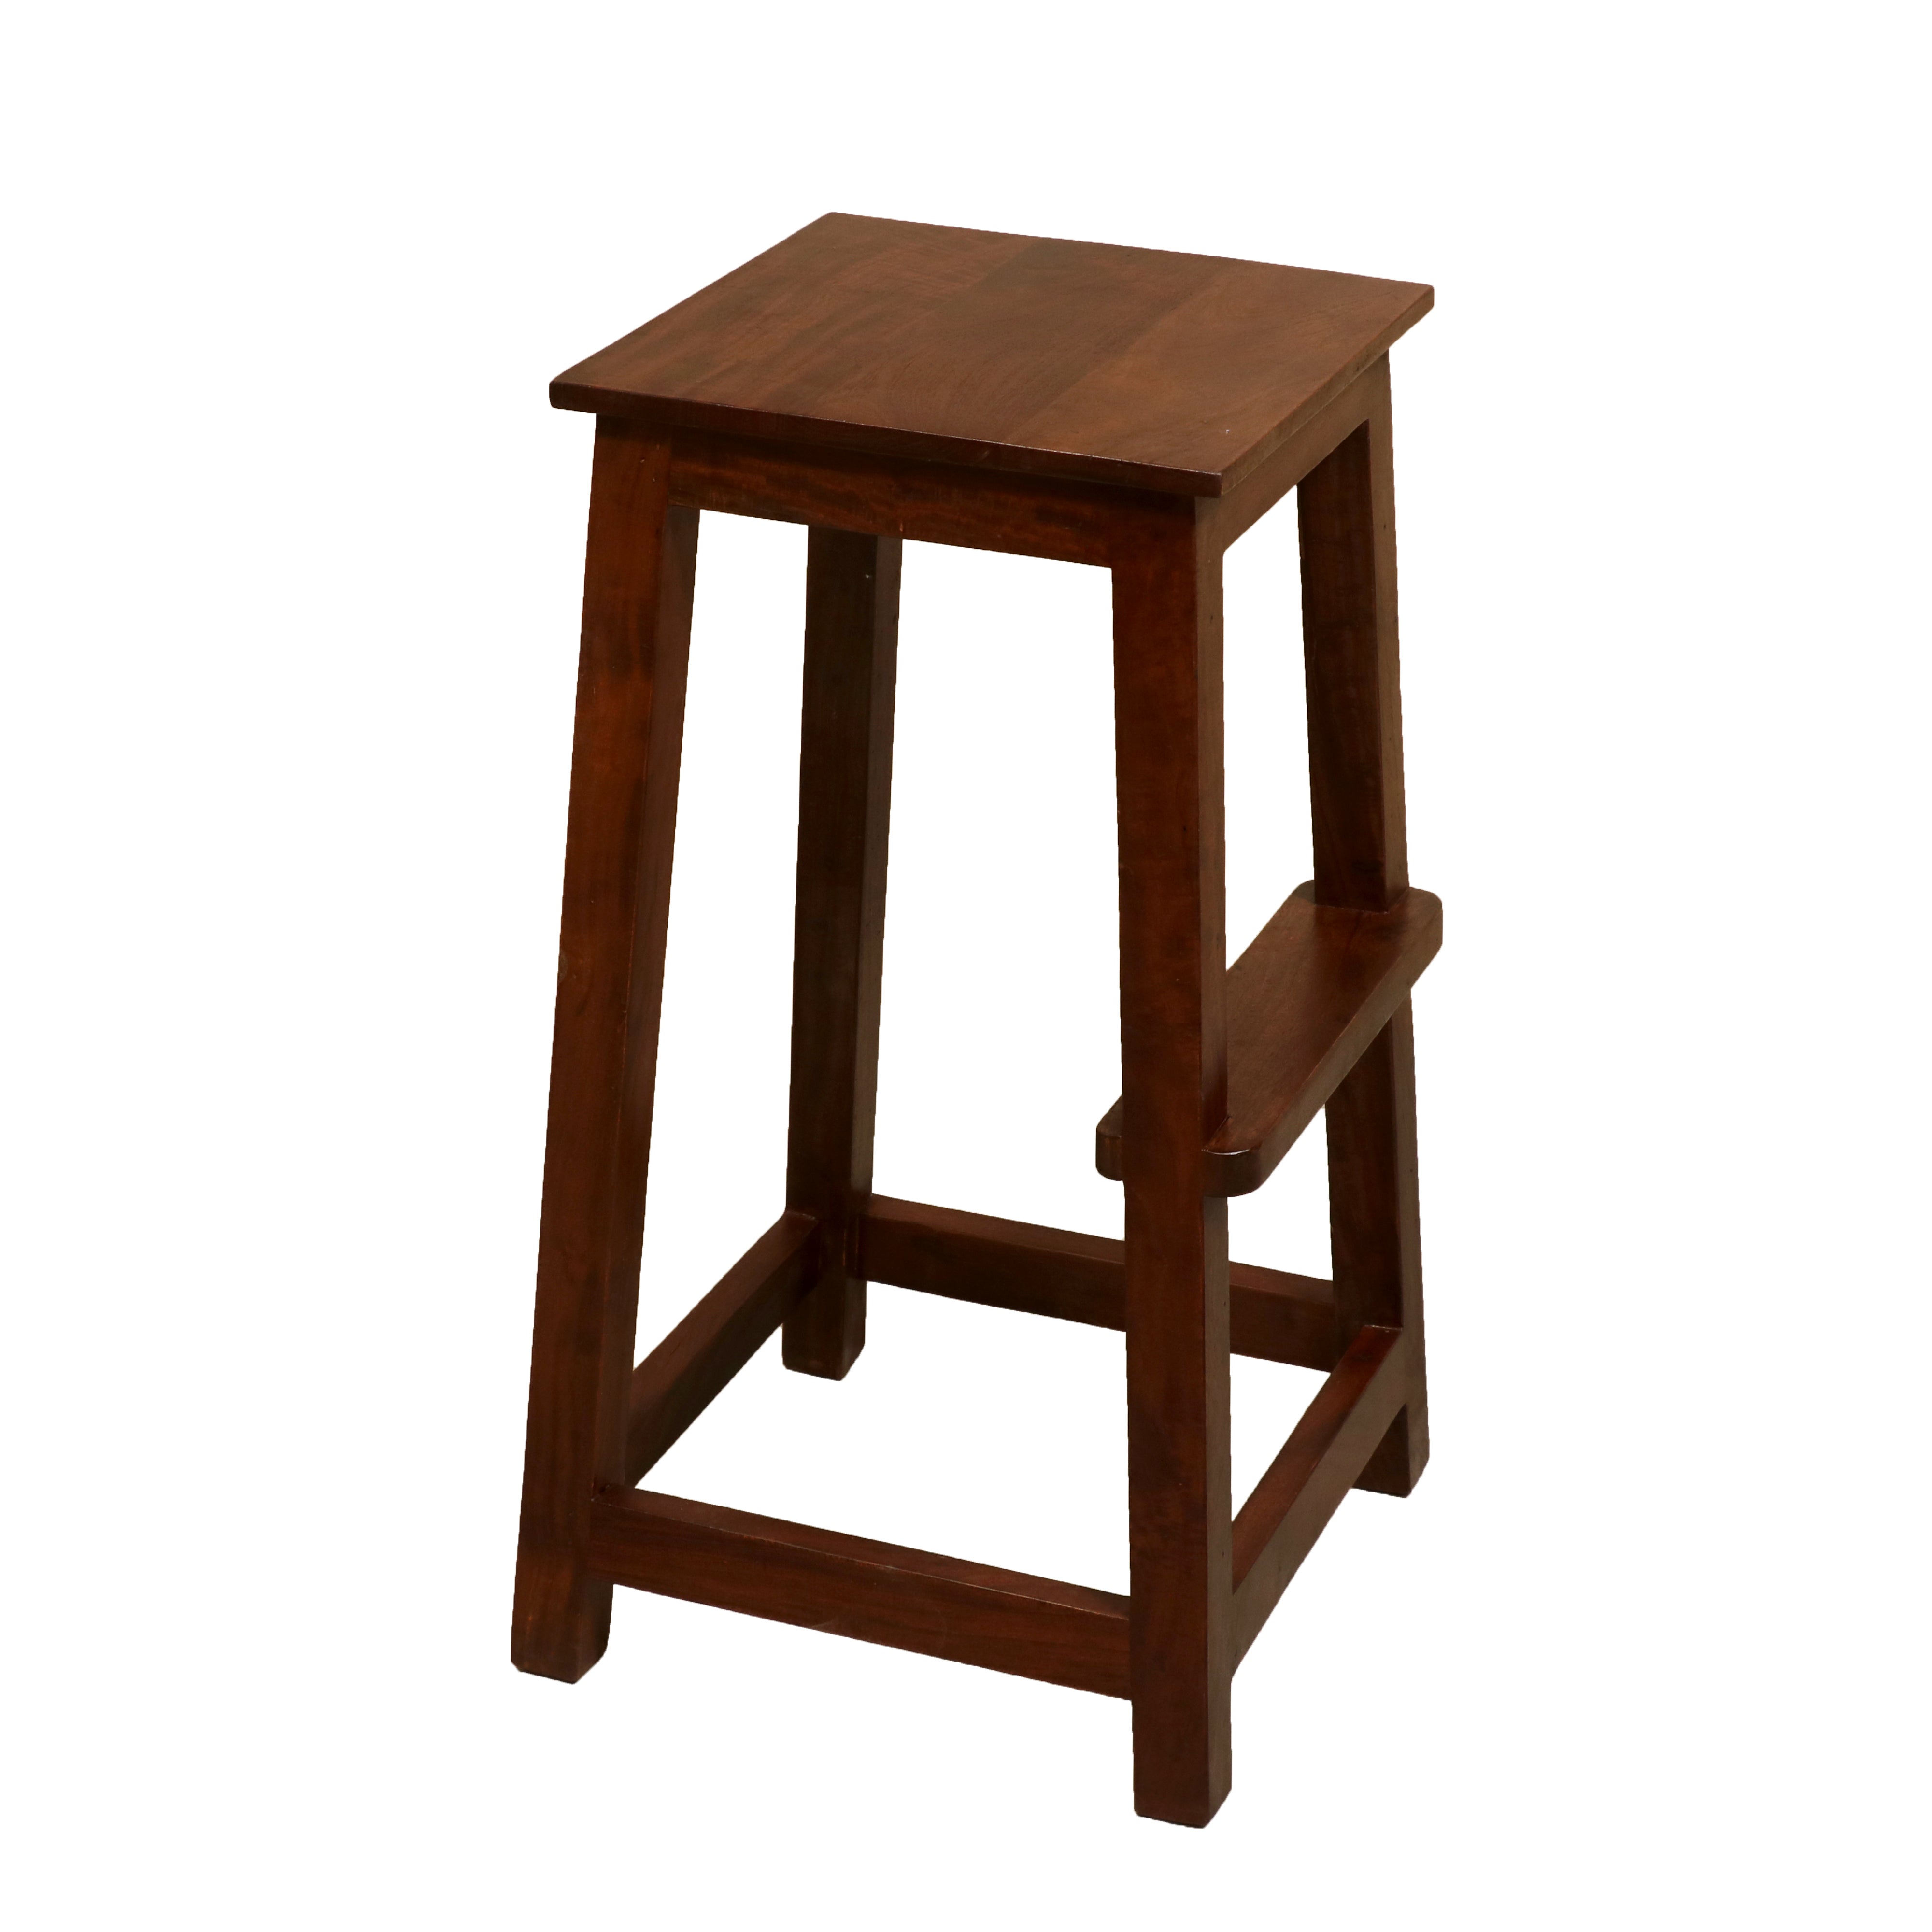 Classic Wooden Step Stool Stool